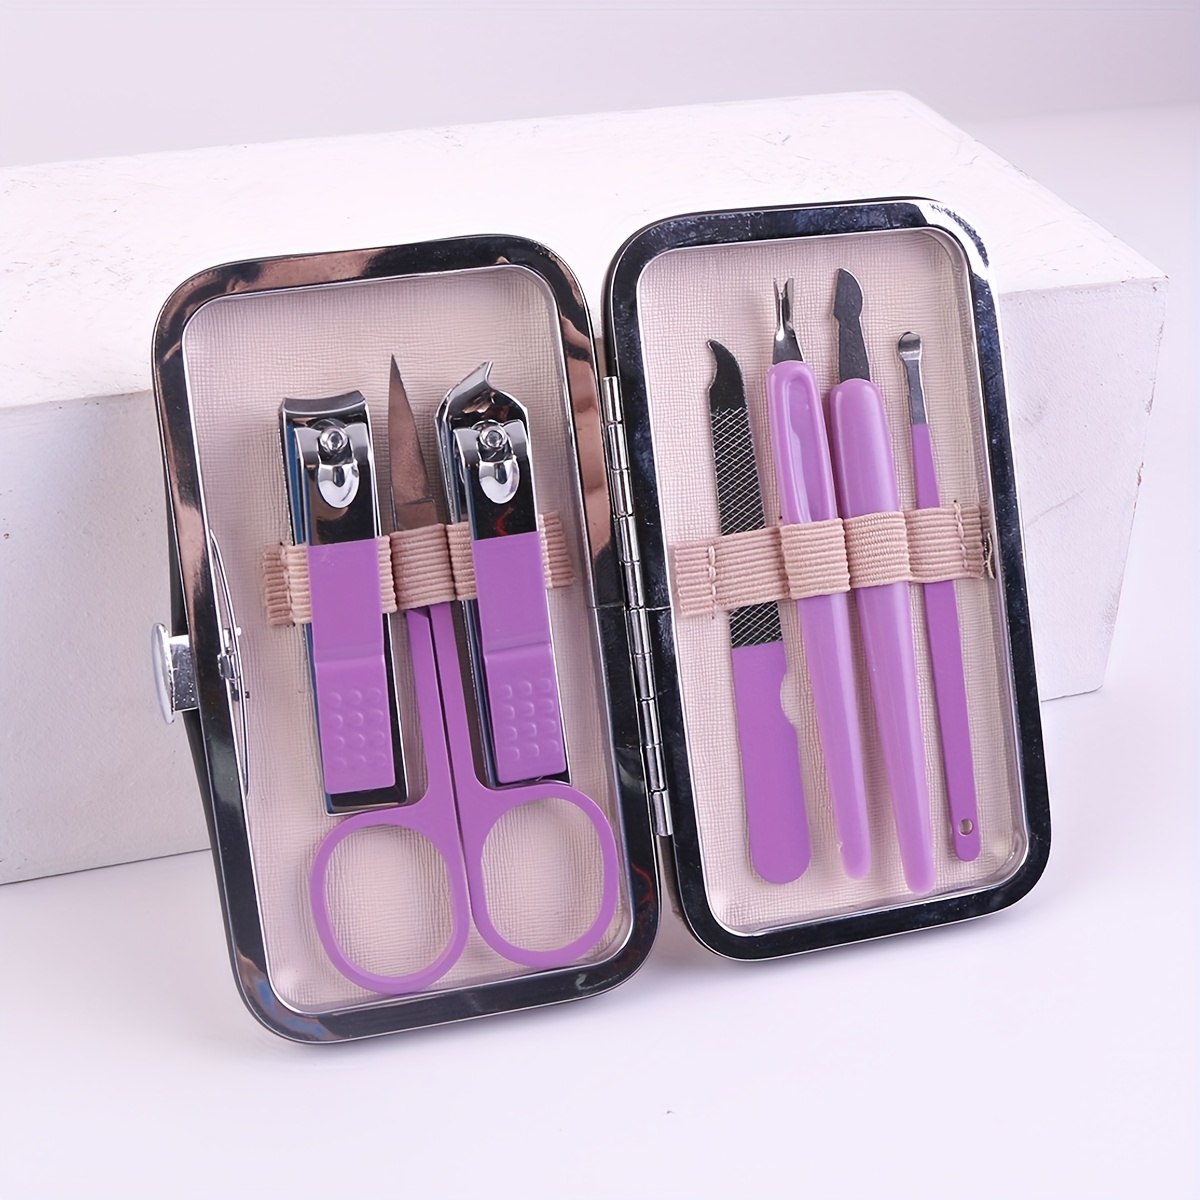 Nail Clippers Set Stainless Steel Nail Kit Eyebrow Tweezers Dead